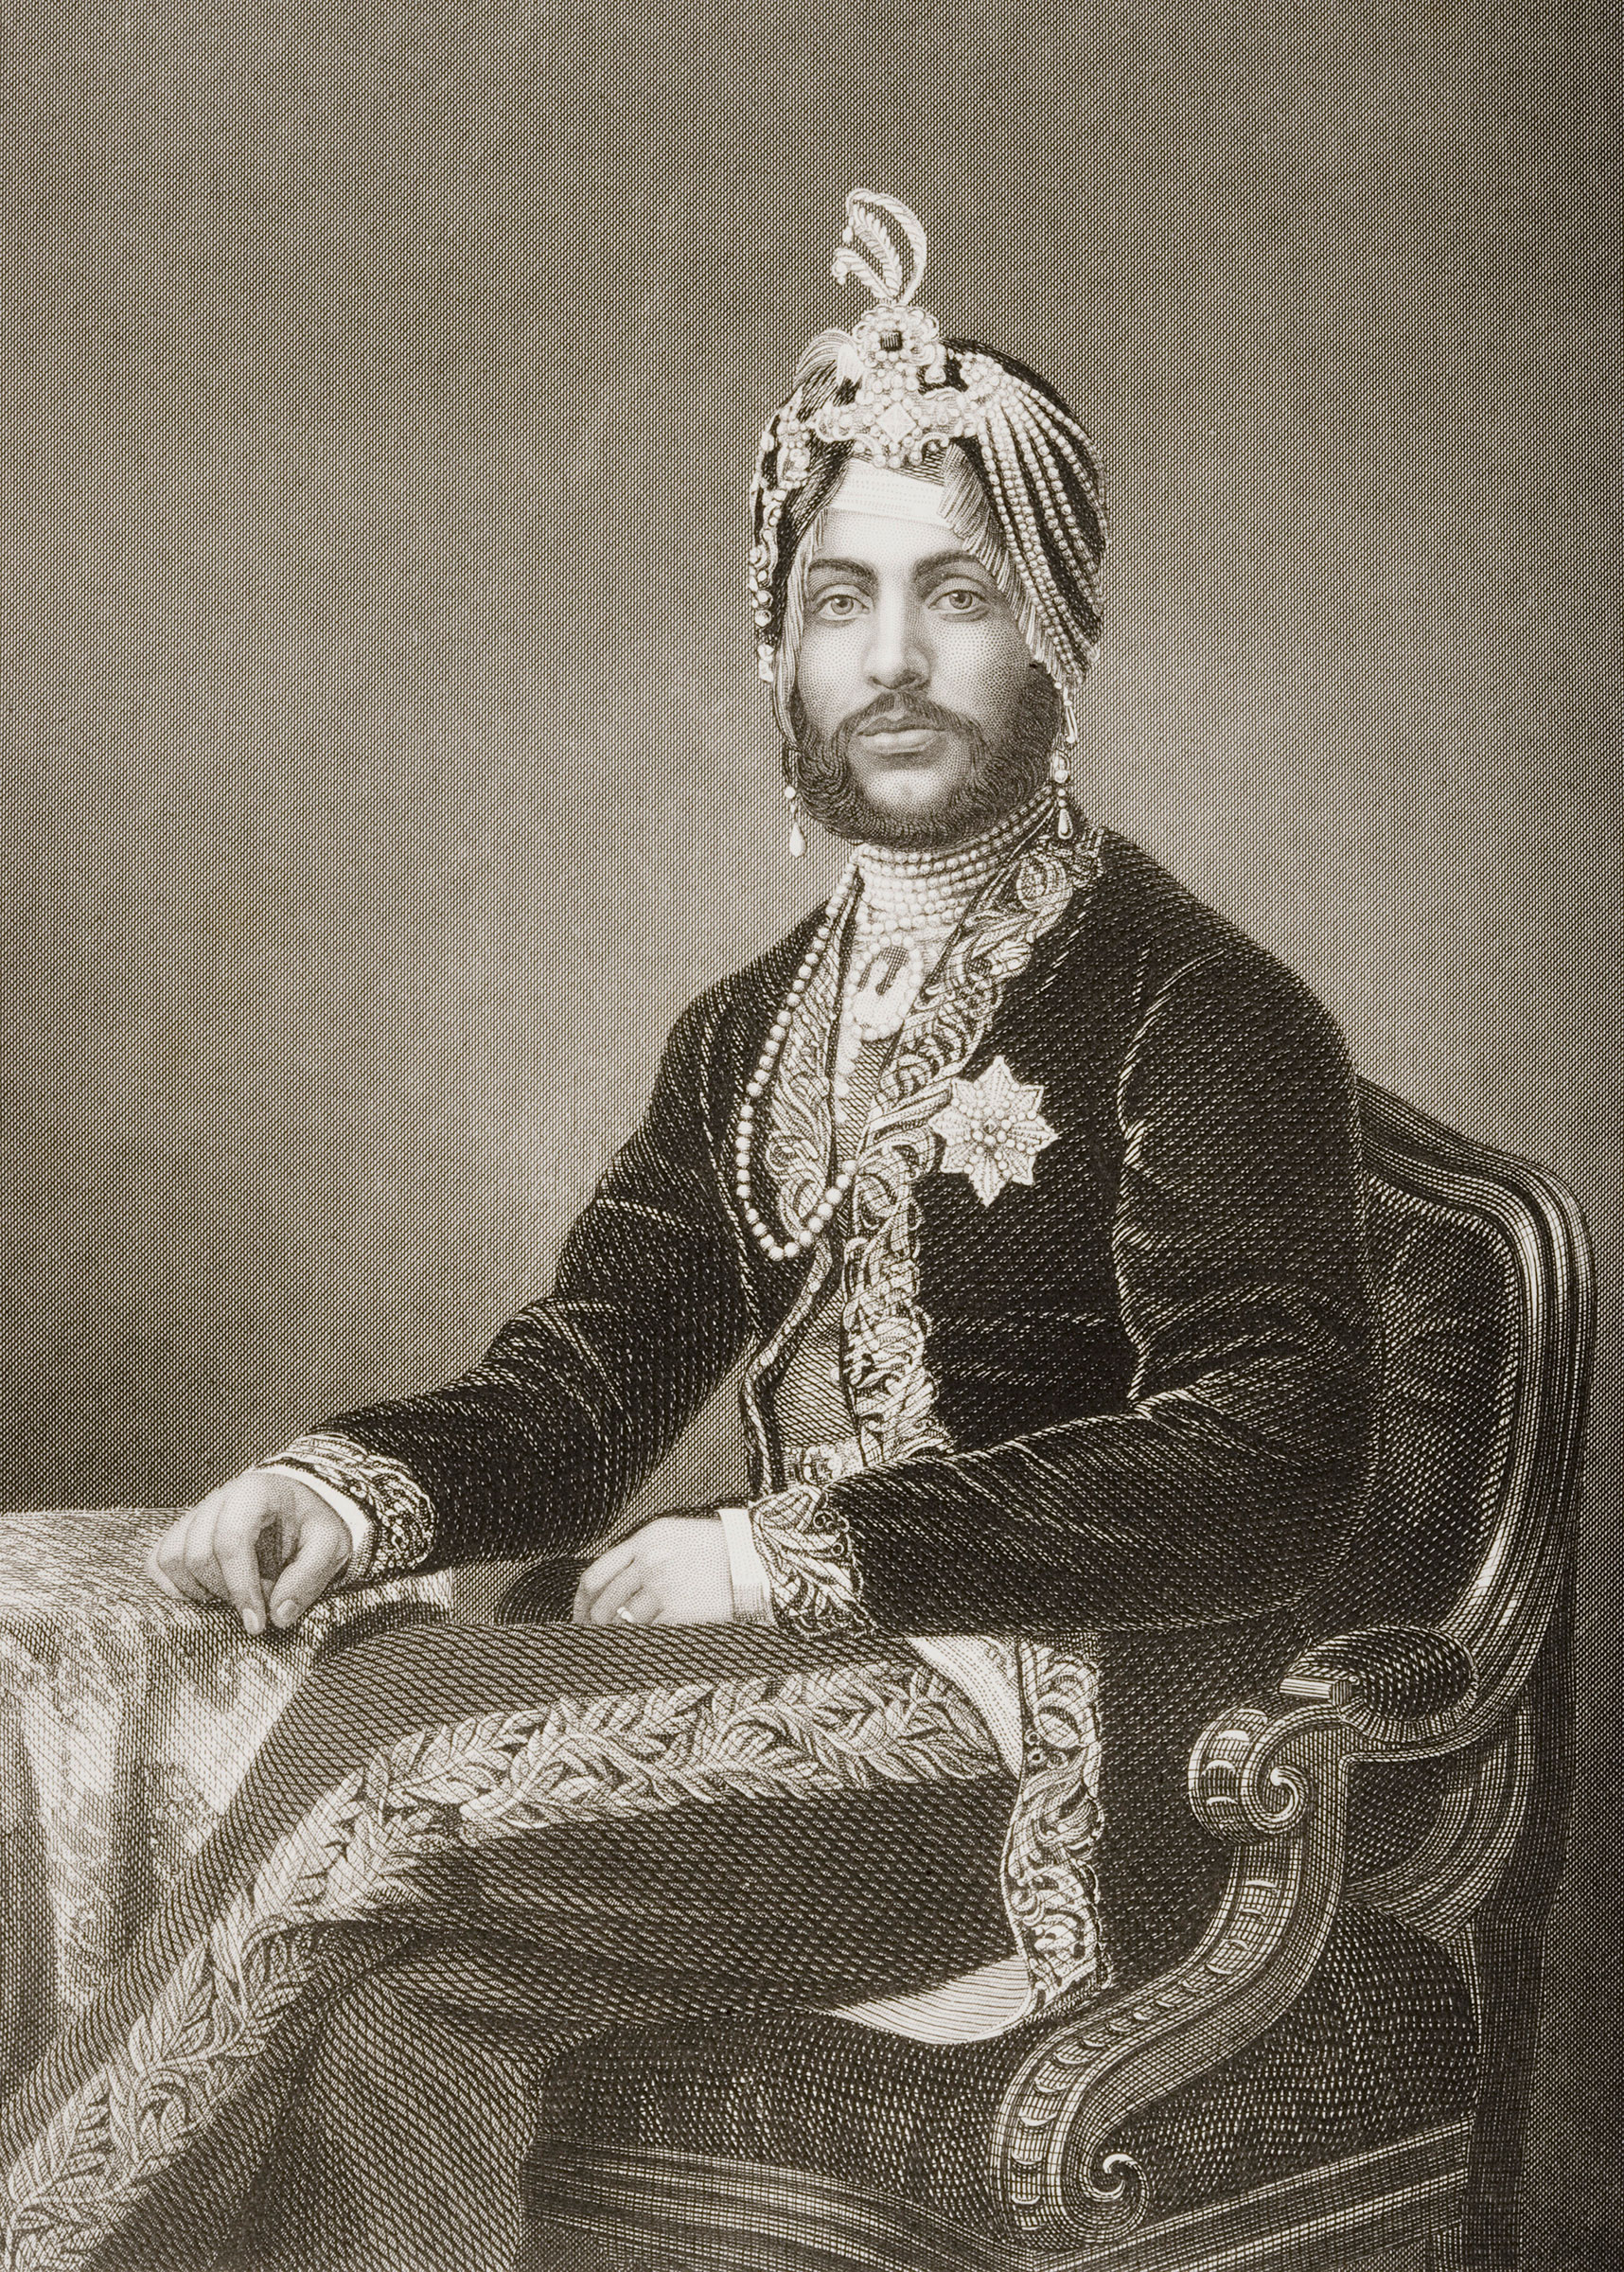 Duleep Singh, Maharajah of Lahore, 1837-1893. Engraved by D.J. Pound from a photograph by Mayall. From the book "The Drawing-Room Portrait Gallery of Eminent Personages" Published in London 1859. (Universal History Archive/Getty Images)